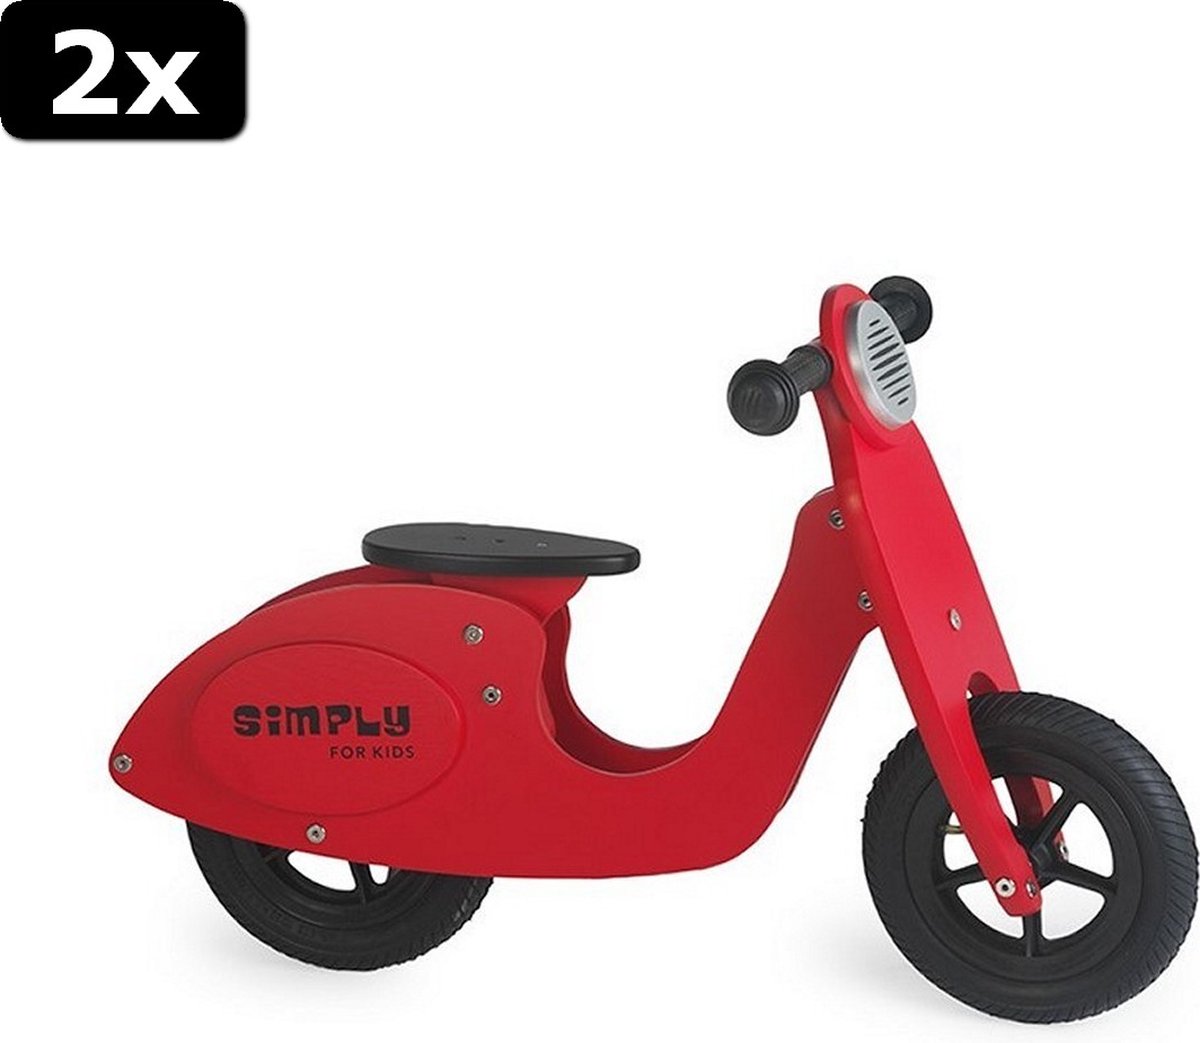 2x Simply for Kids Houten Loopscooter Rood